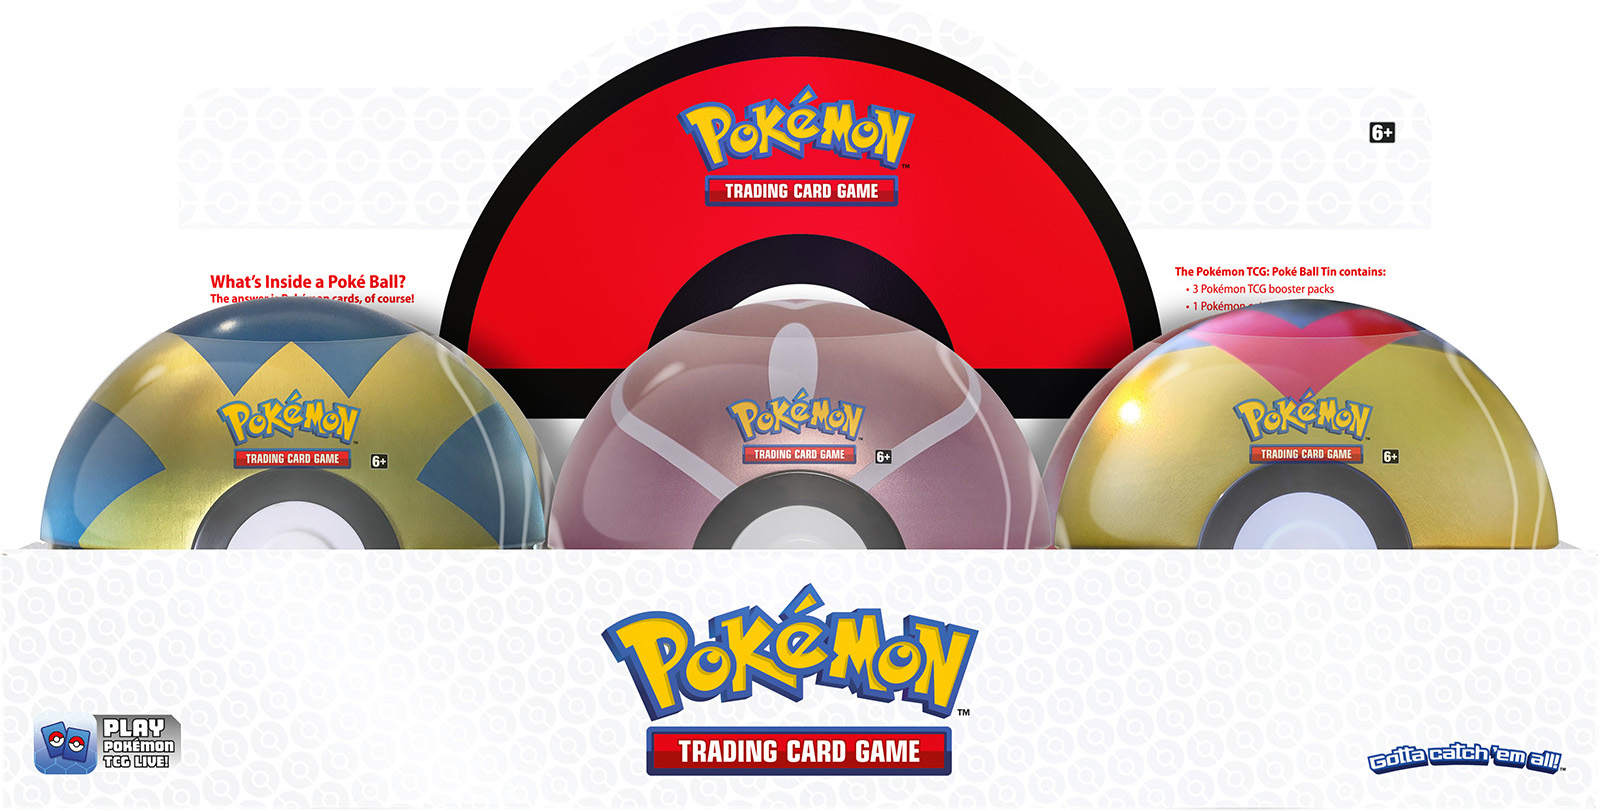 Pokémon - What's inside a Pokeball banner. Contains 3 Pokemon TCG Booster Packs, and 1 Pokemon Coin 